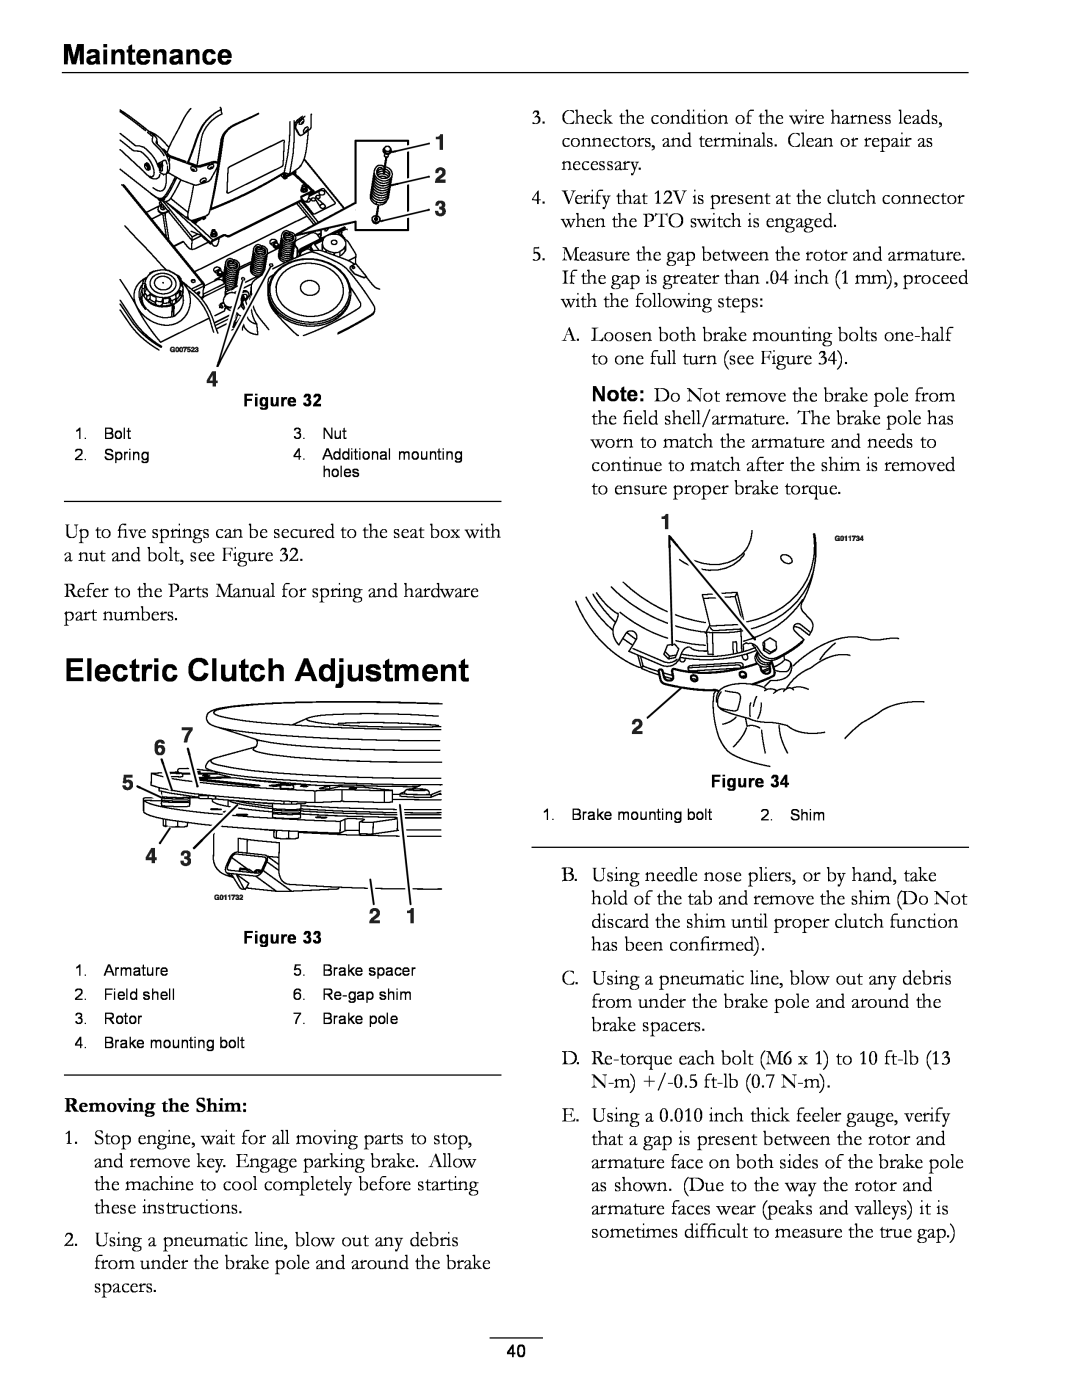 Exmark 920 manual Electric Clutch Adjustment, Removing the Shim, Maintenance 